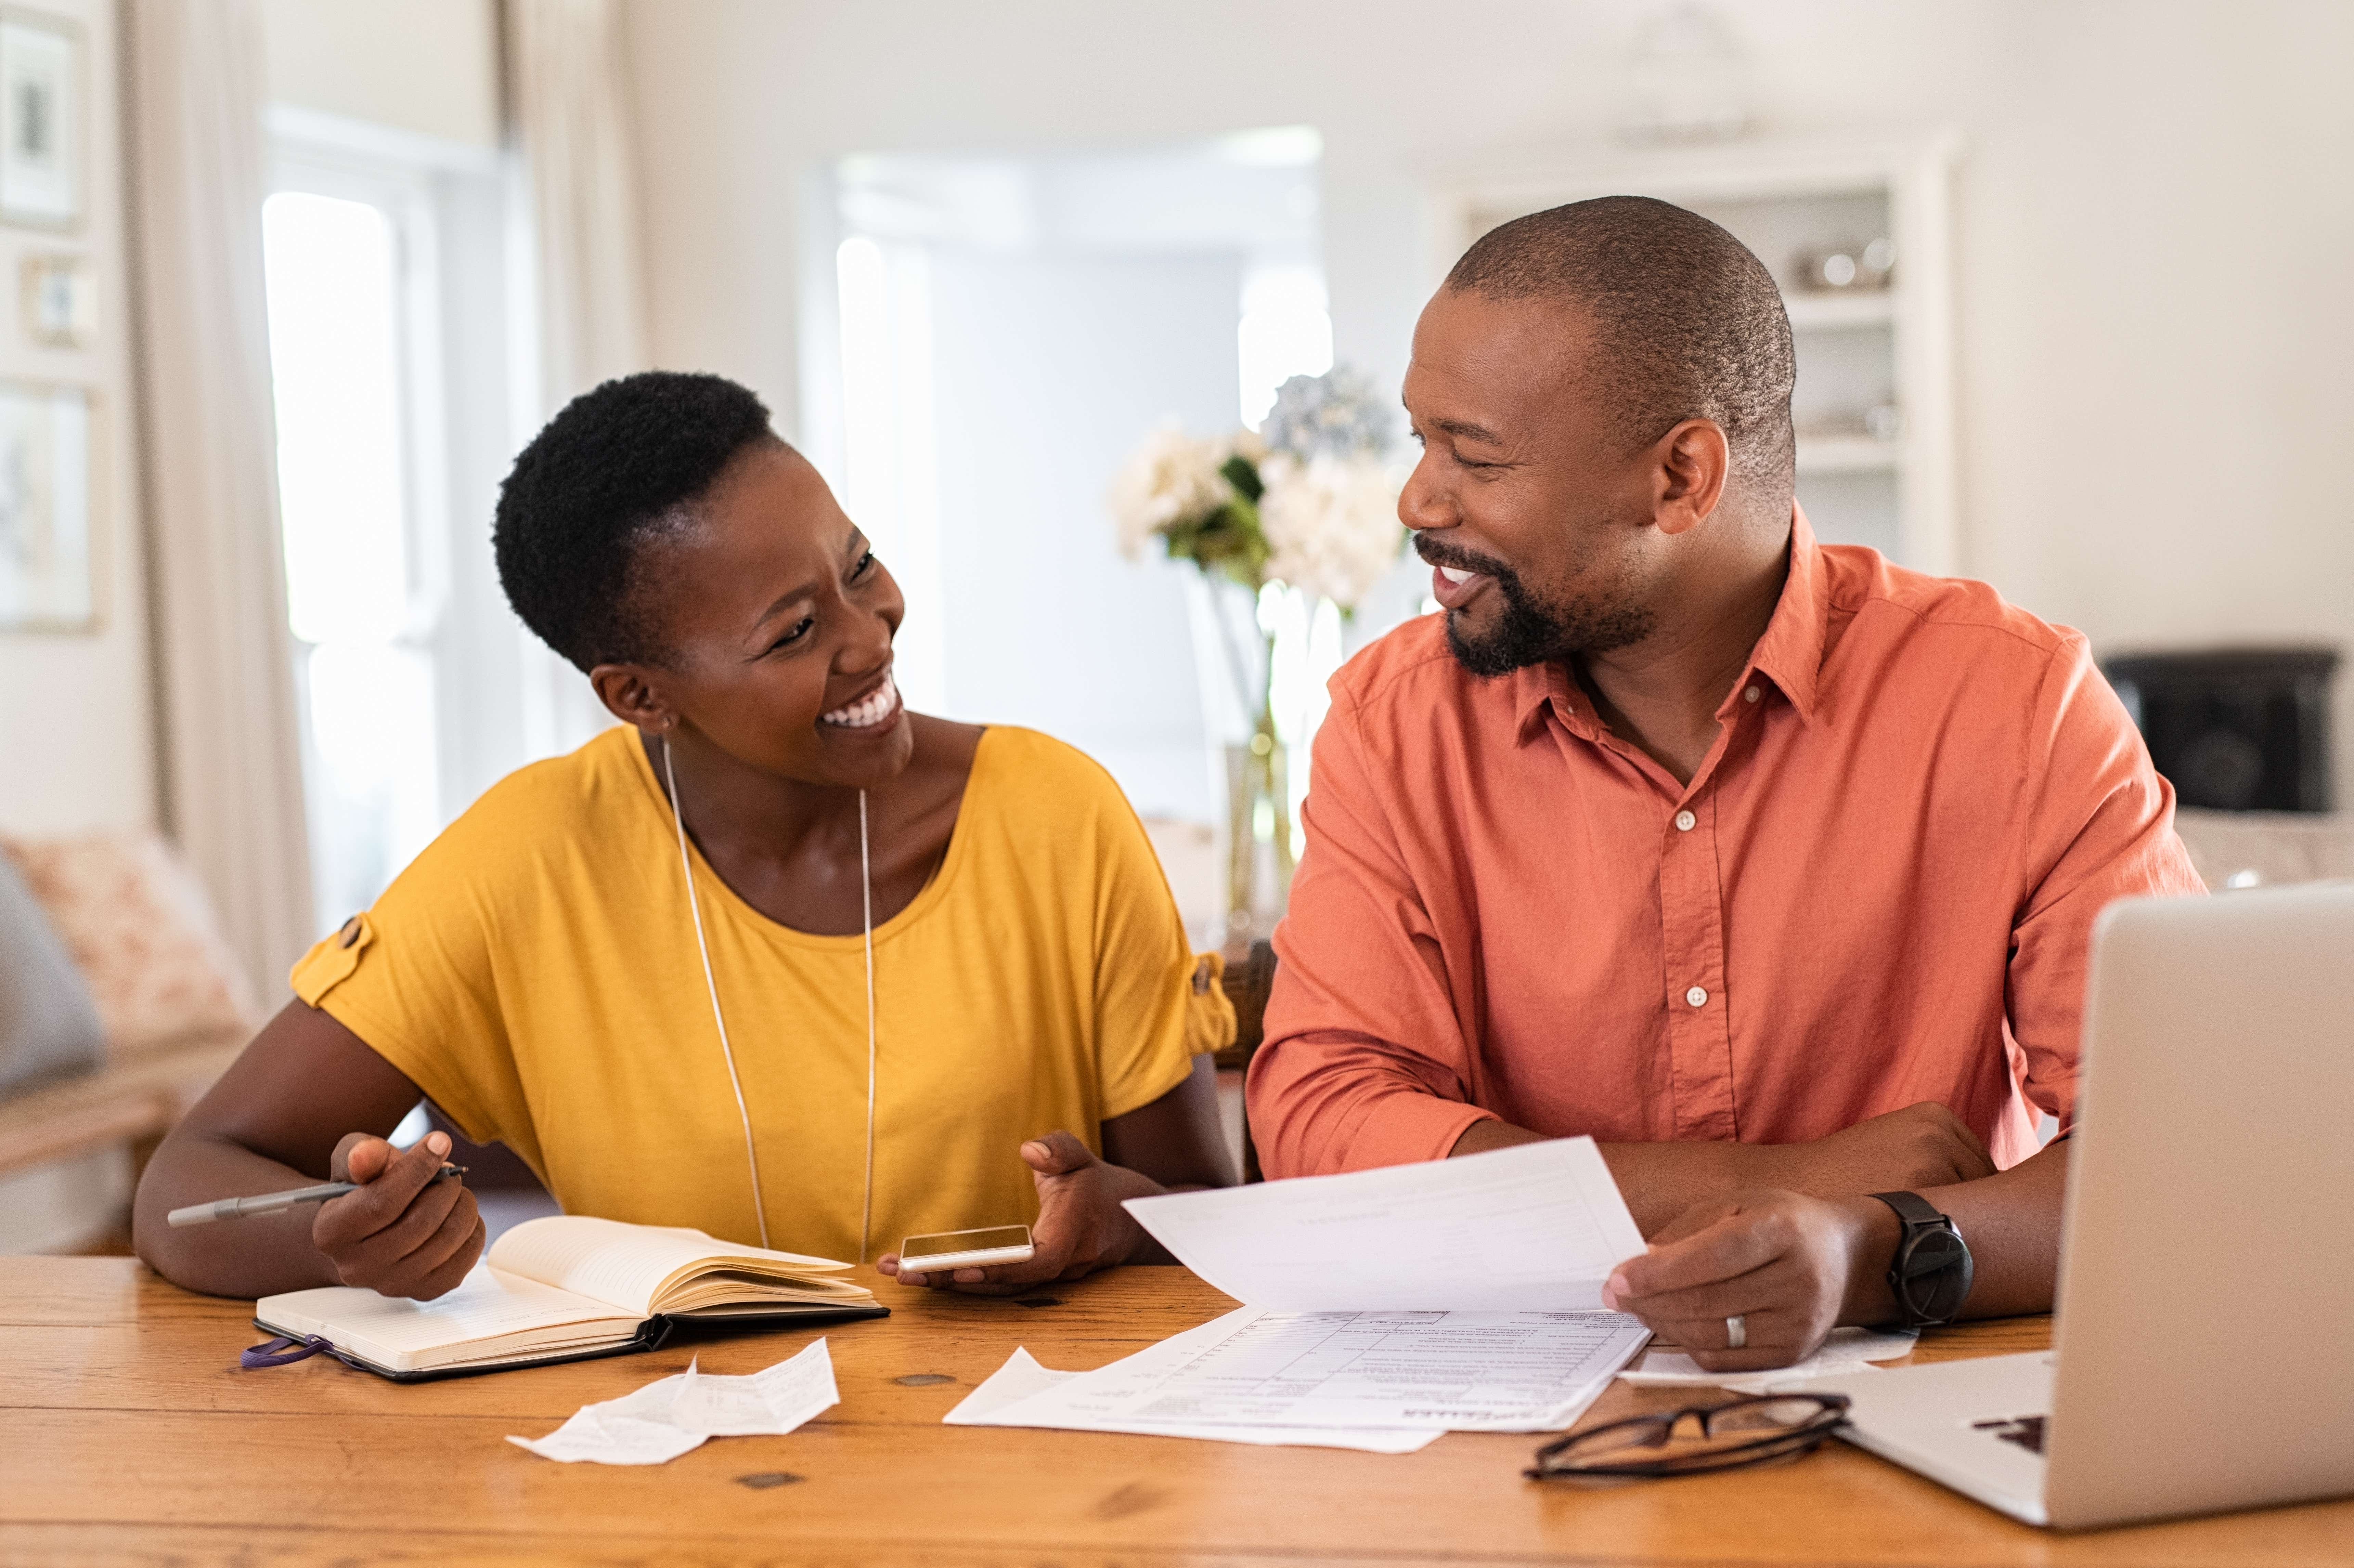 Smiling couple sitting together at home looking at bills and paperwork